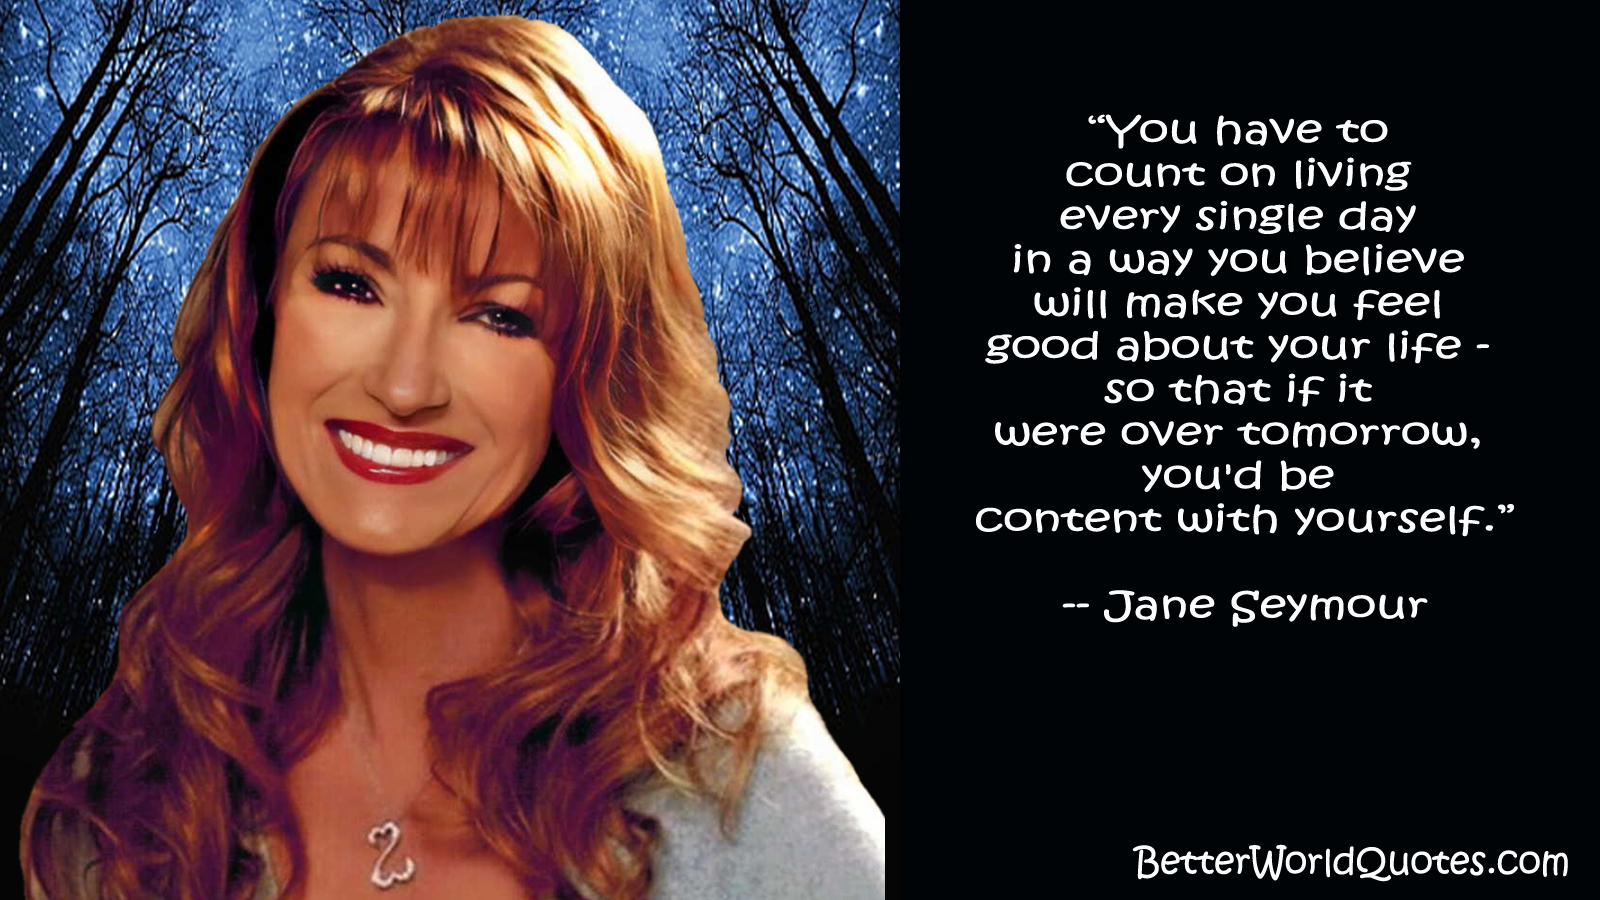 Jane Seymour - You have to count on living every single day in a way you believe will make you feel good about your life--so that if it were over tomorrow, you'd be content with yourself.
- Jane Seymour